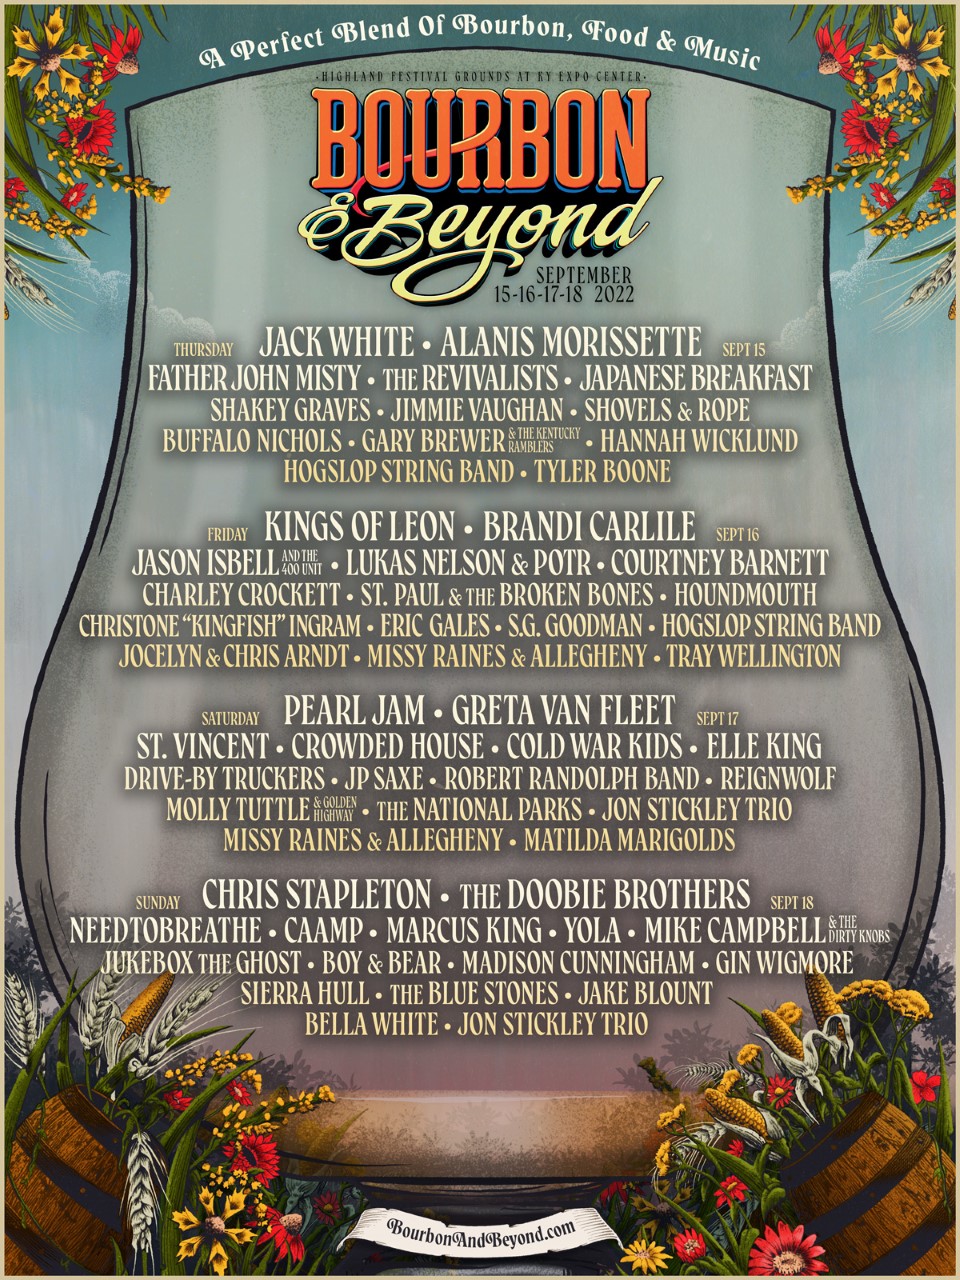 ***REGISTER TO WIN WEEKEND PASSES TO BOURBON AND BEYOND BELOW***